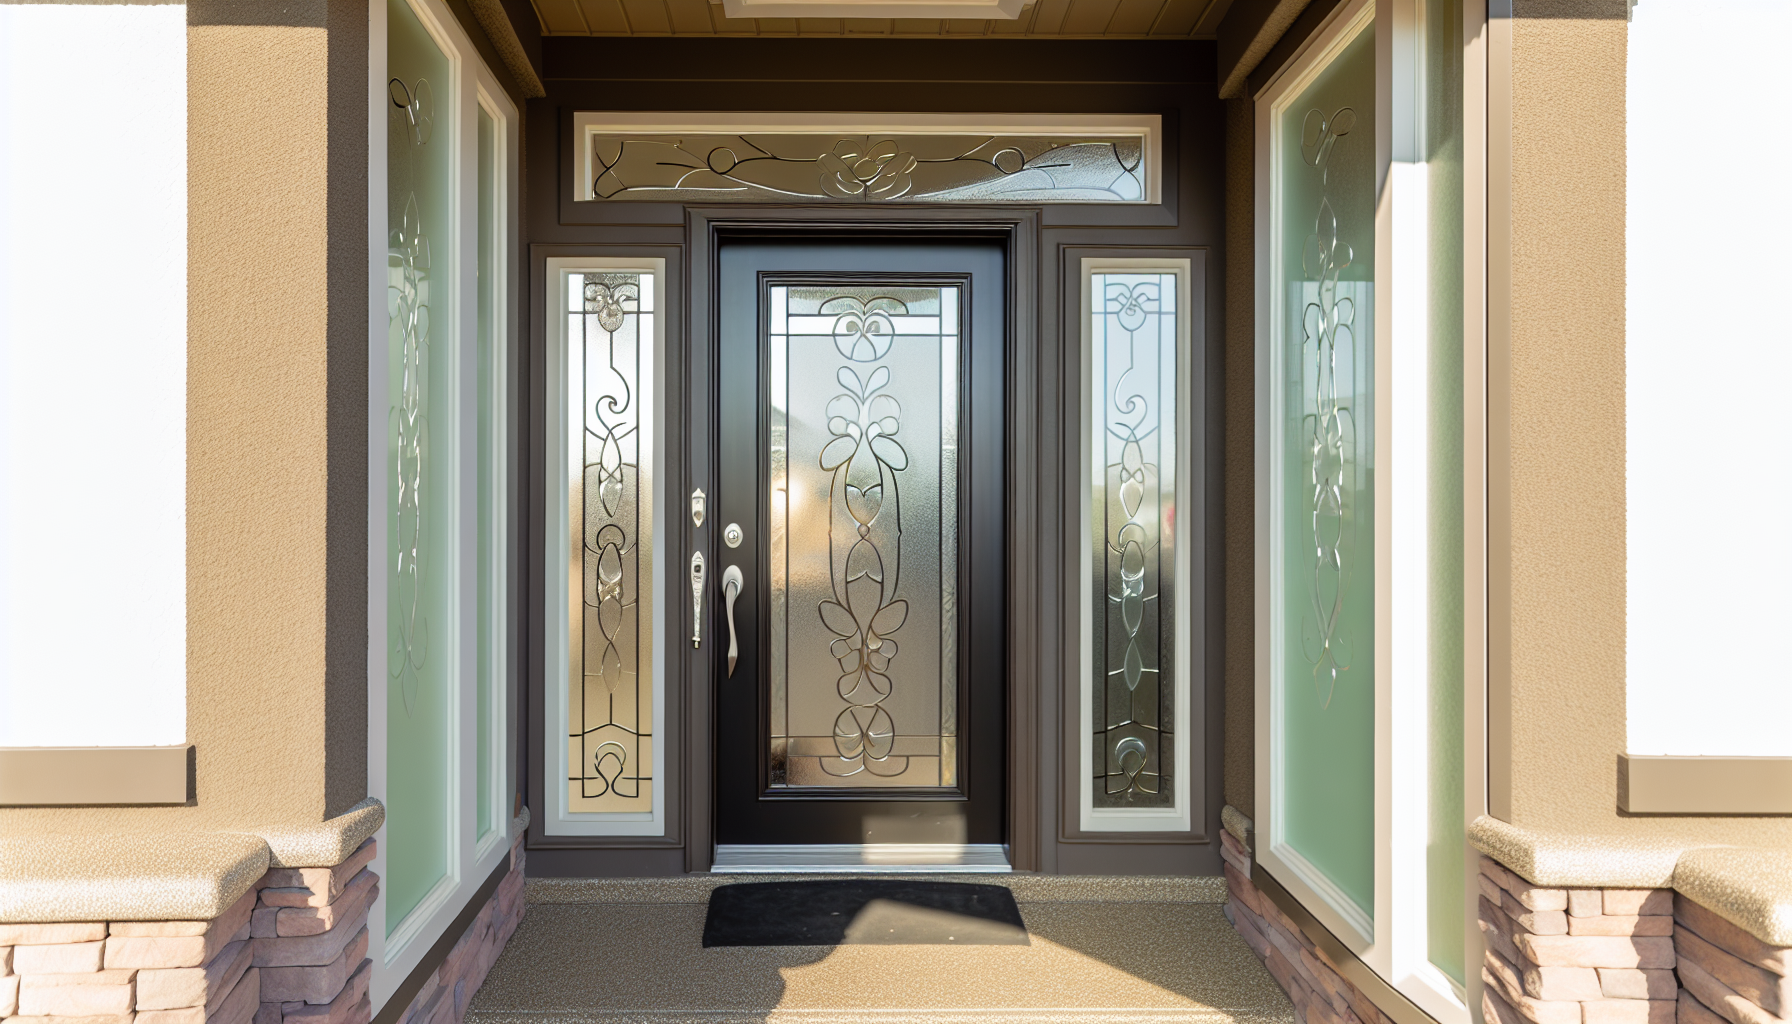 An elegant frosted glass front door with decorative sidelights and transoms